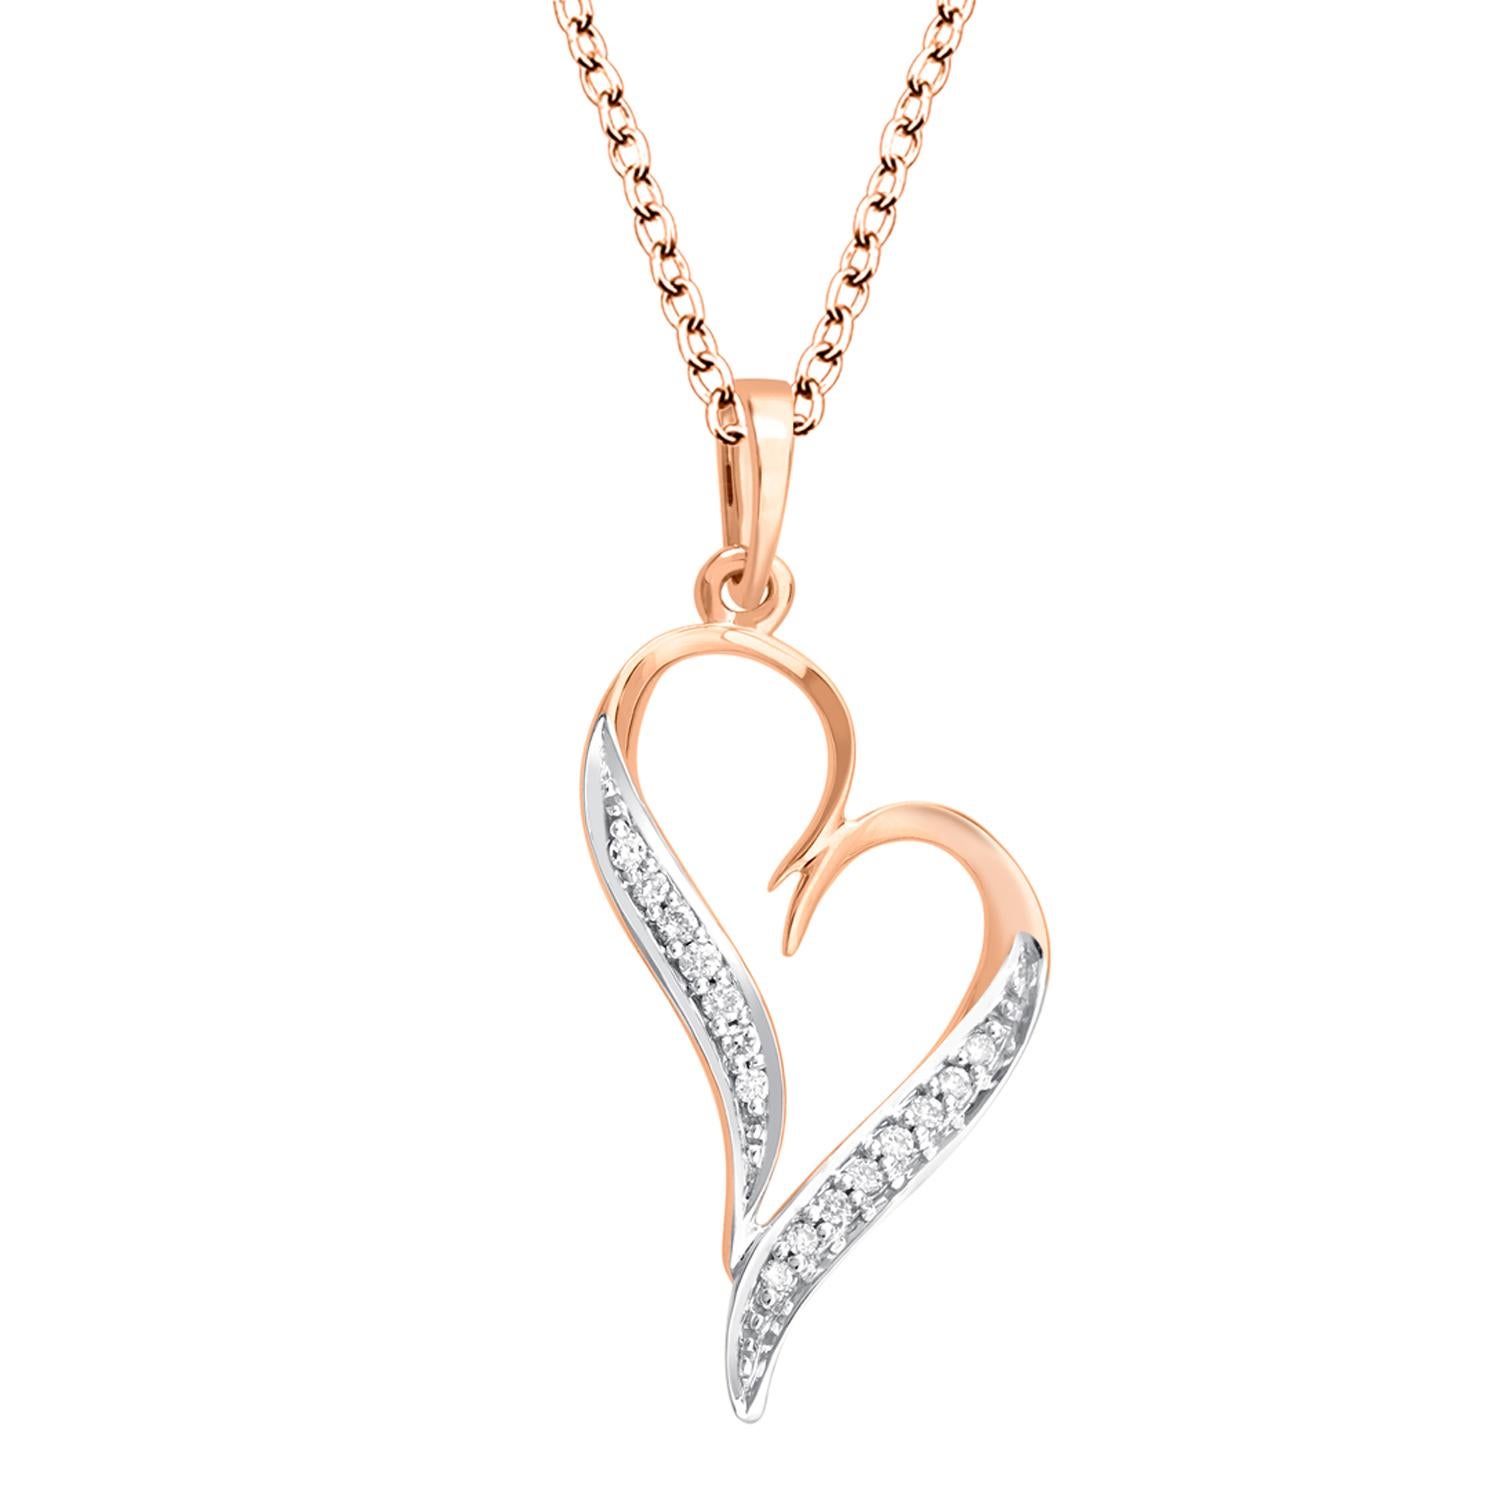 Heart of Gold 14 Karat Pink Gold and Diamond Pendant for Necklace.

Diamonds of approximately 0.07 carats, mounted on 14 karat pink gold pendant. The Pendant weighs approximately 0.91 grams.

Please note: The charges specified do not include any